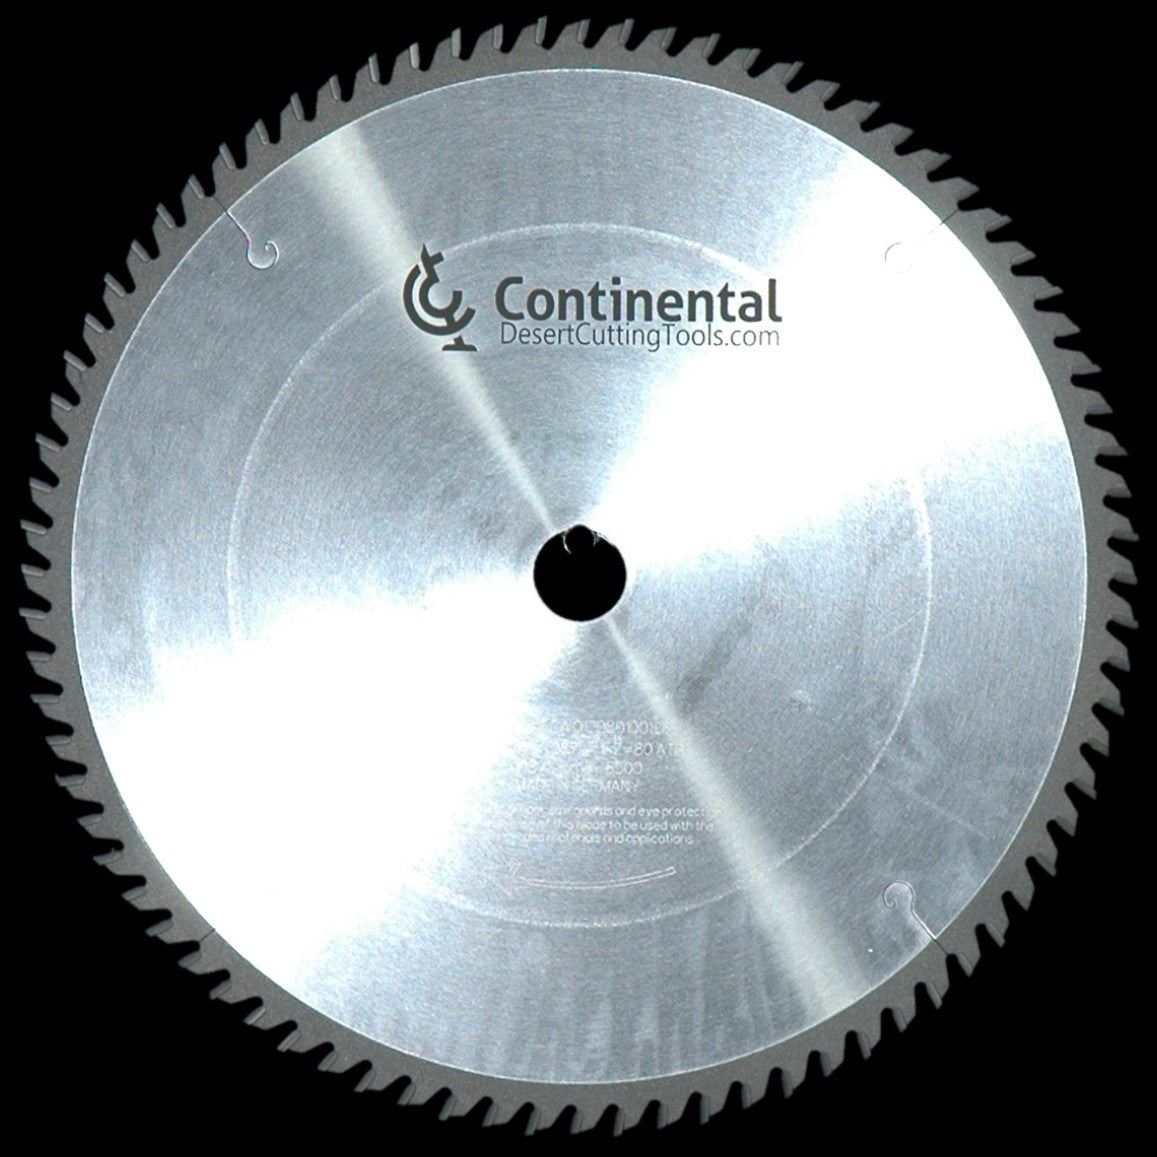 C-1280A Continental Saw Blade 12"x80 tooth 1" bore Alternate Top Bevel